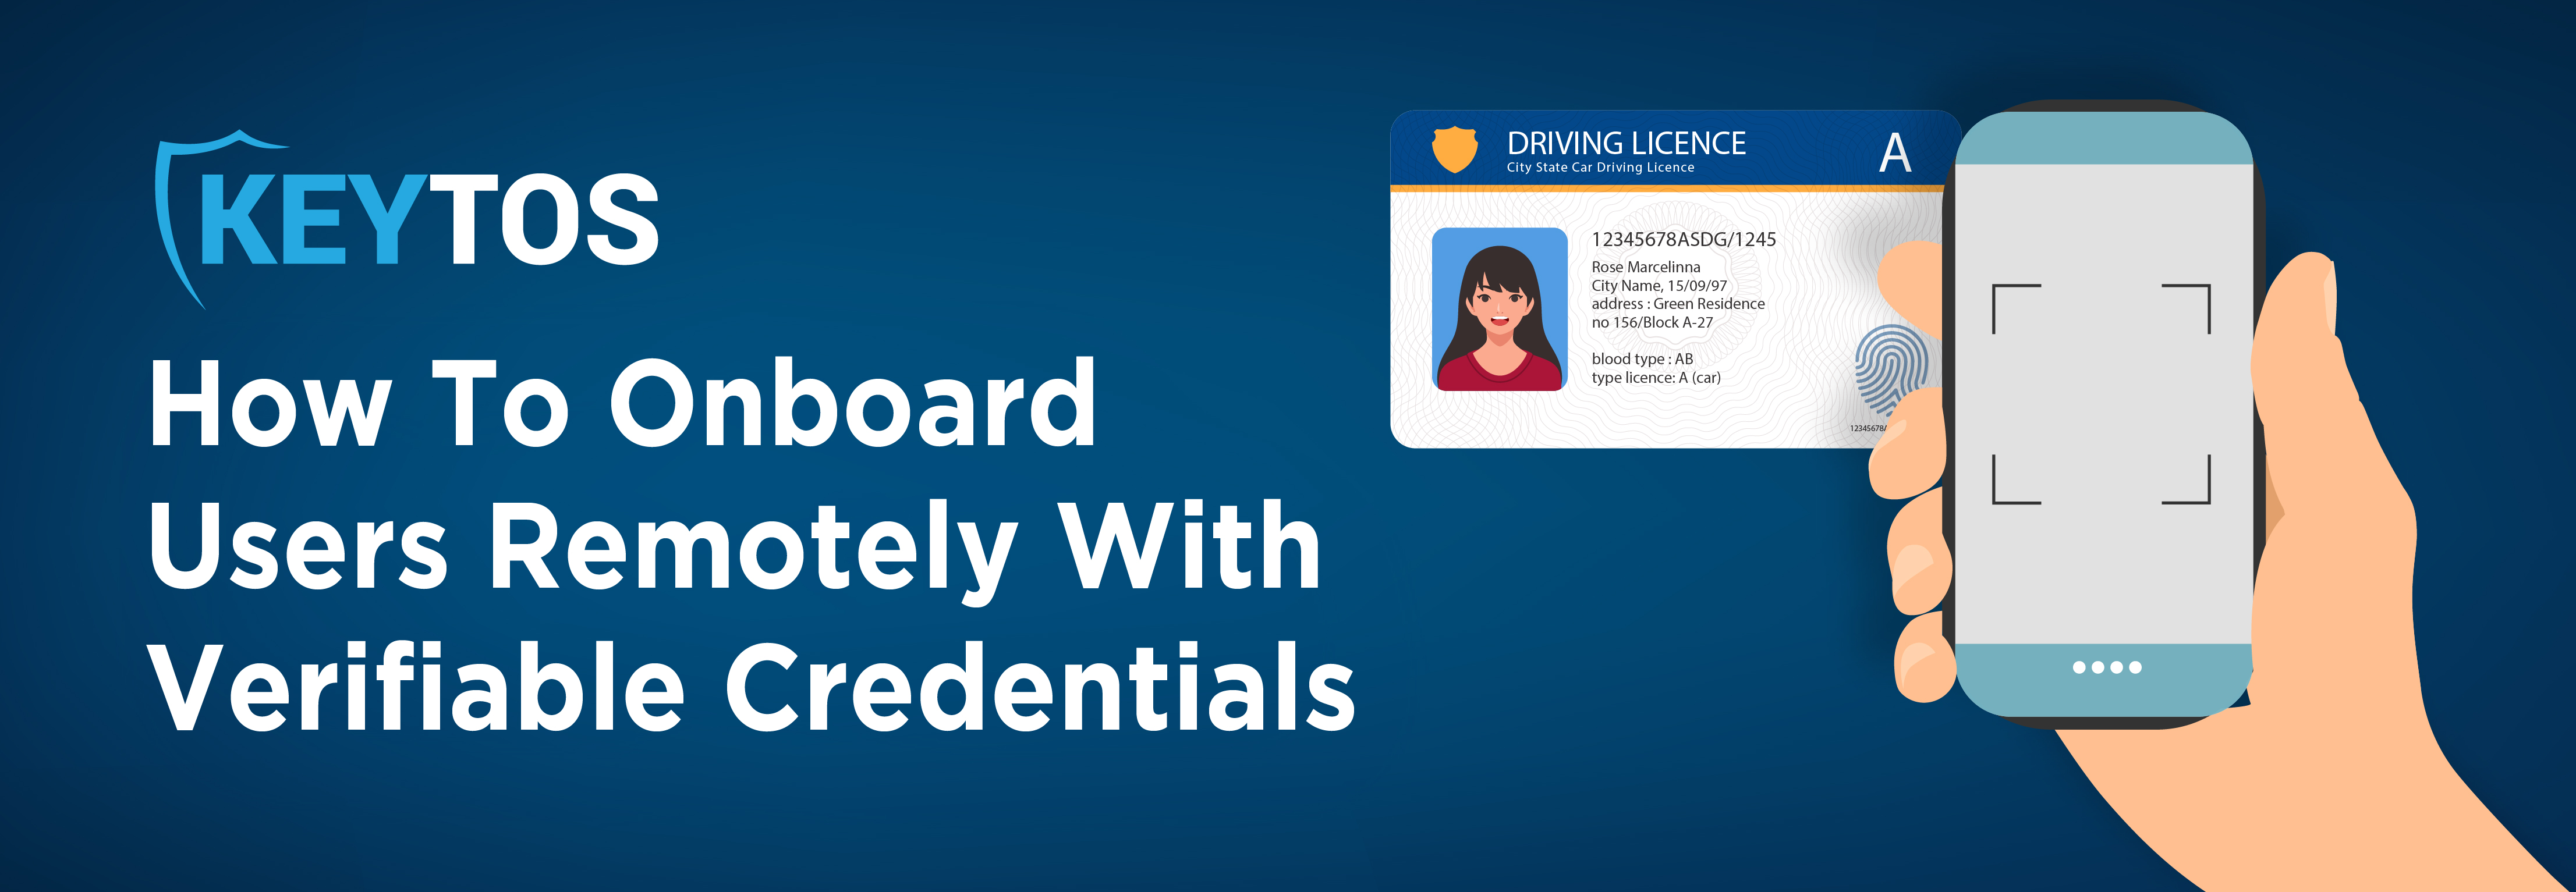 How to Remotely Onboard Users with Verifiable Credentials